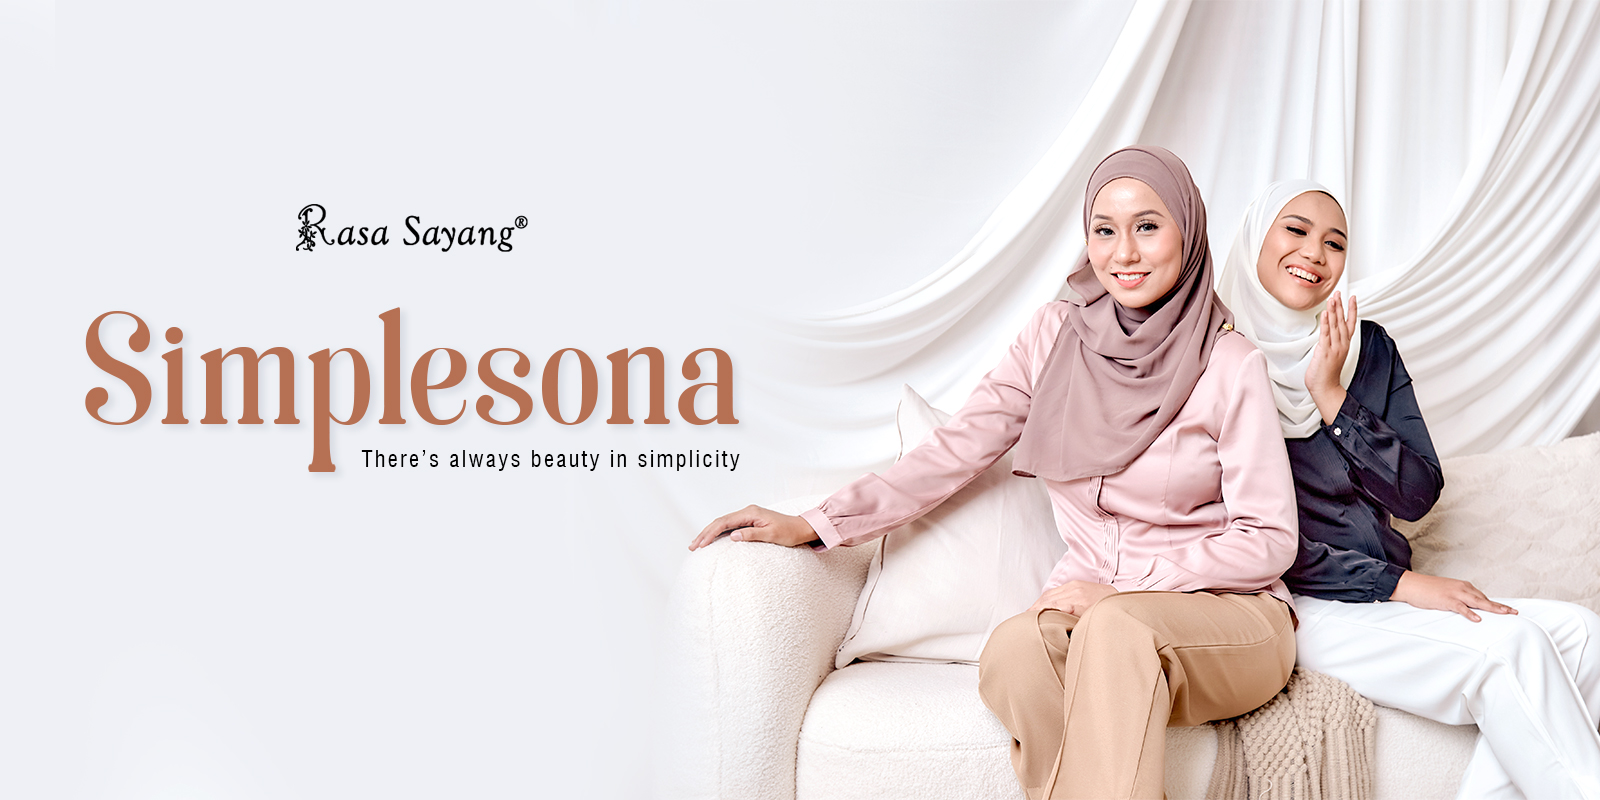 Rs Shopee Simplesona Banner